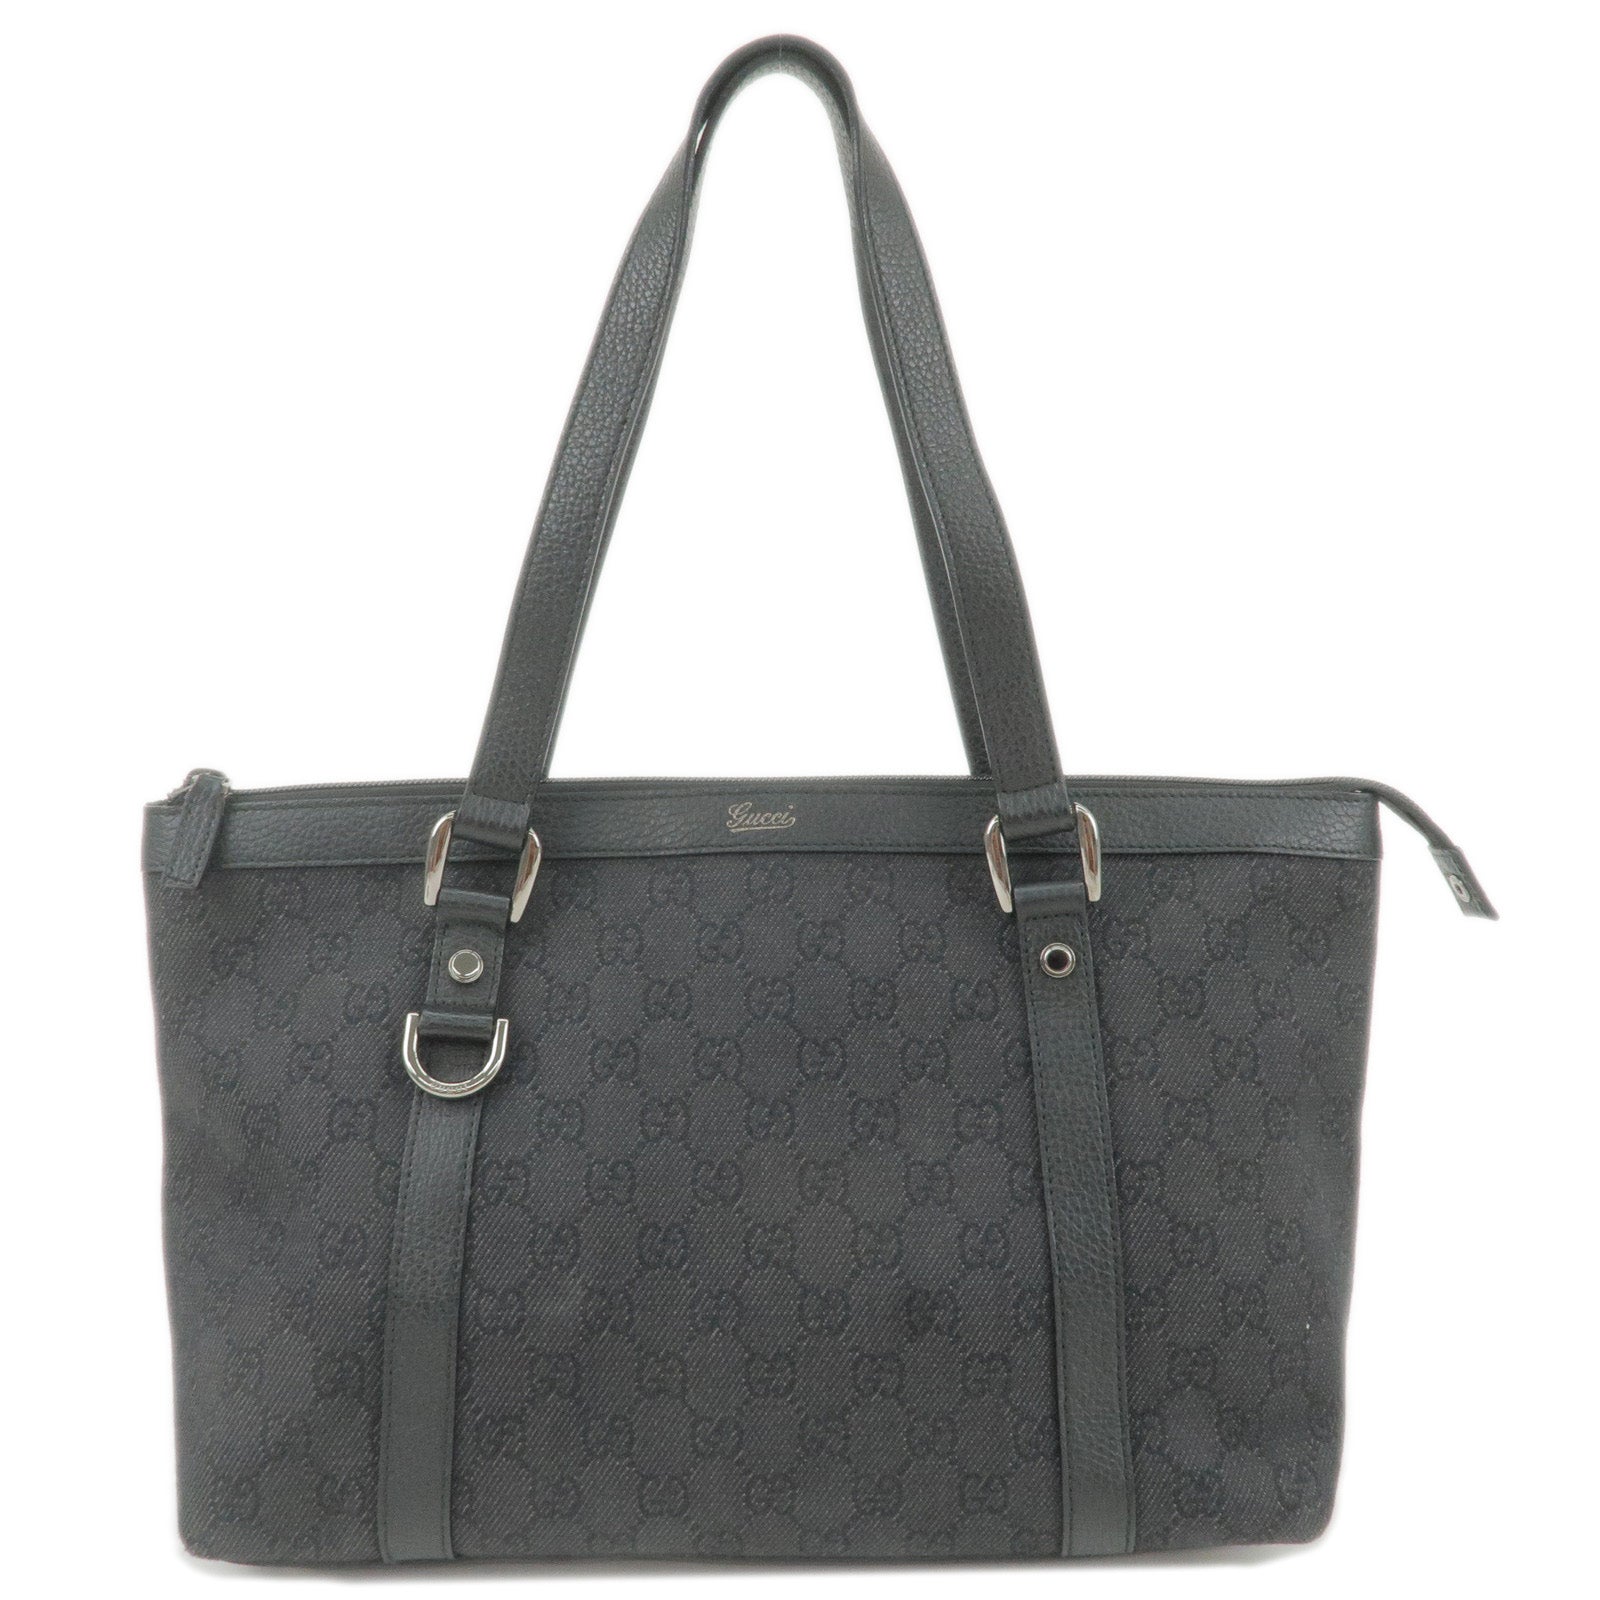 GUCCI-Abbey-GG-Canvas-Leather-Tote-Bag-Hand-Bag-Black-268640 – dct